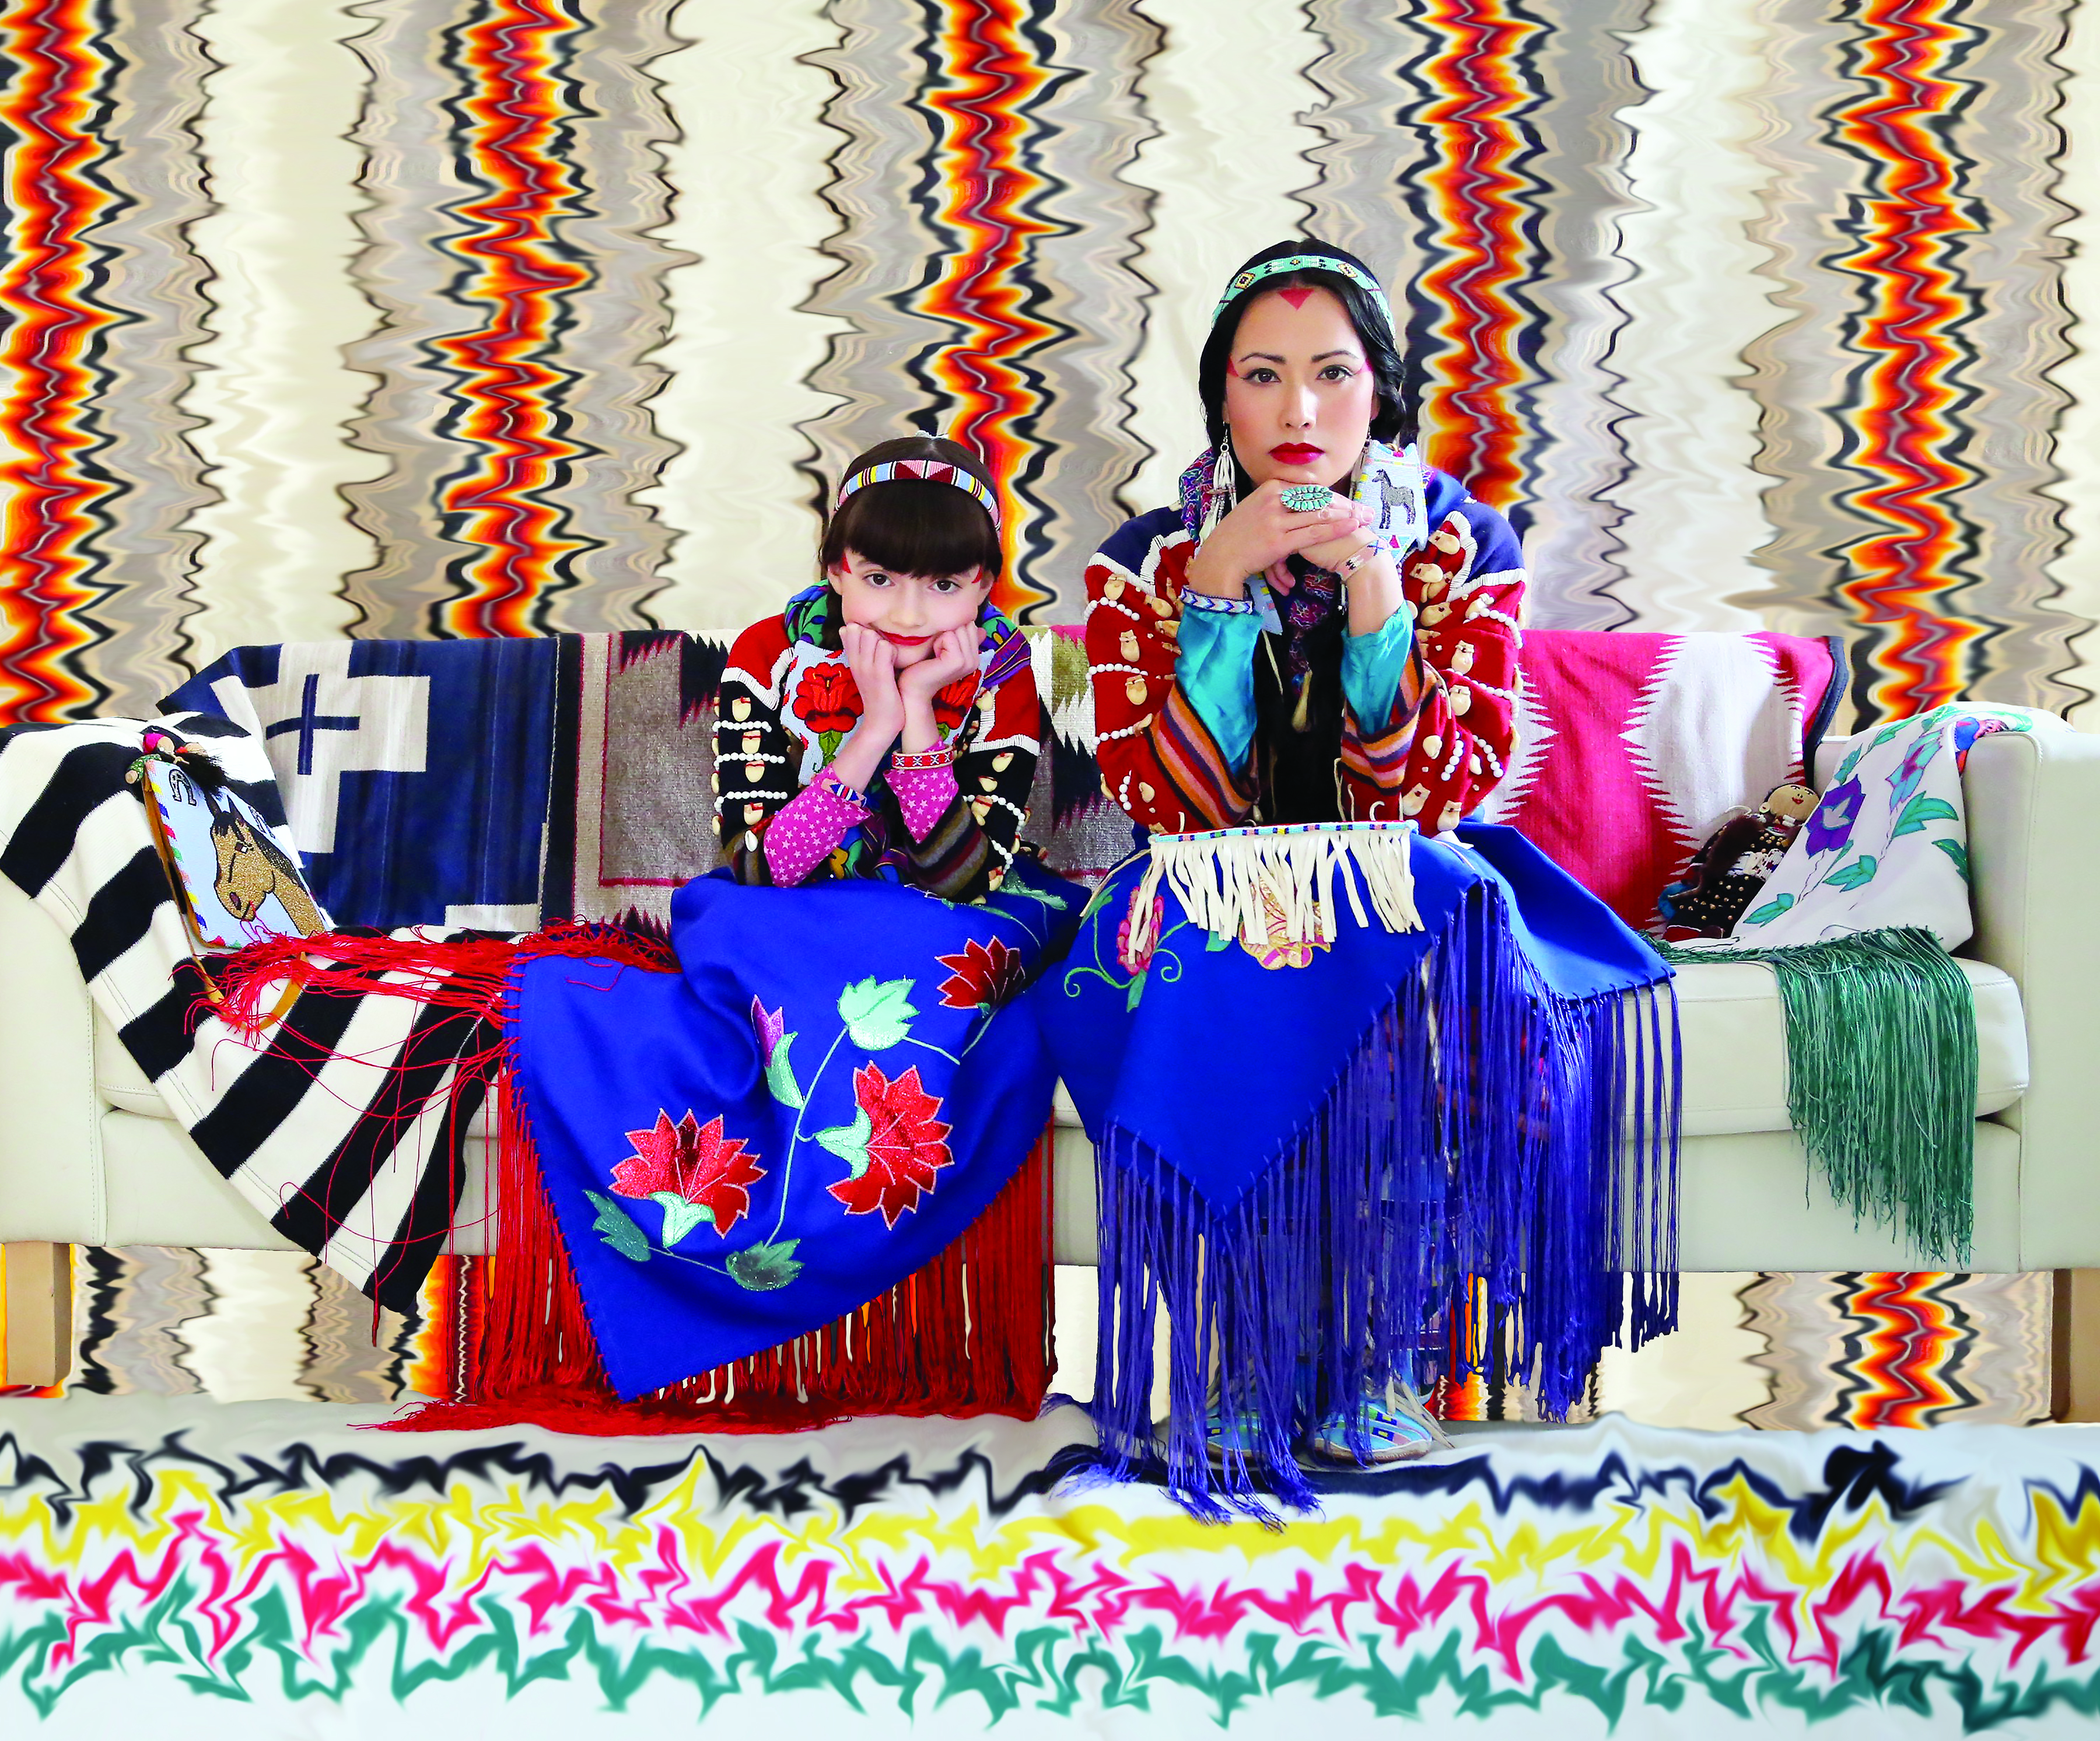 Woman and young girl dressed in Native garb sitting on a couch before a background of dizzying patterns.